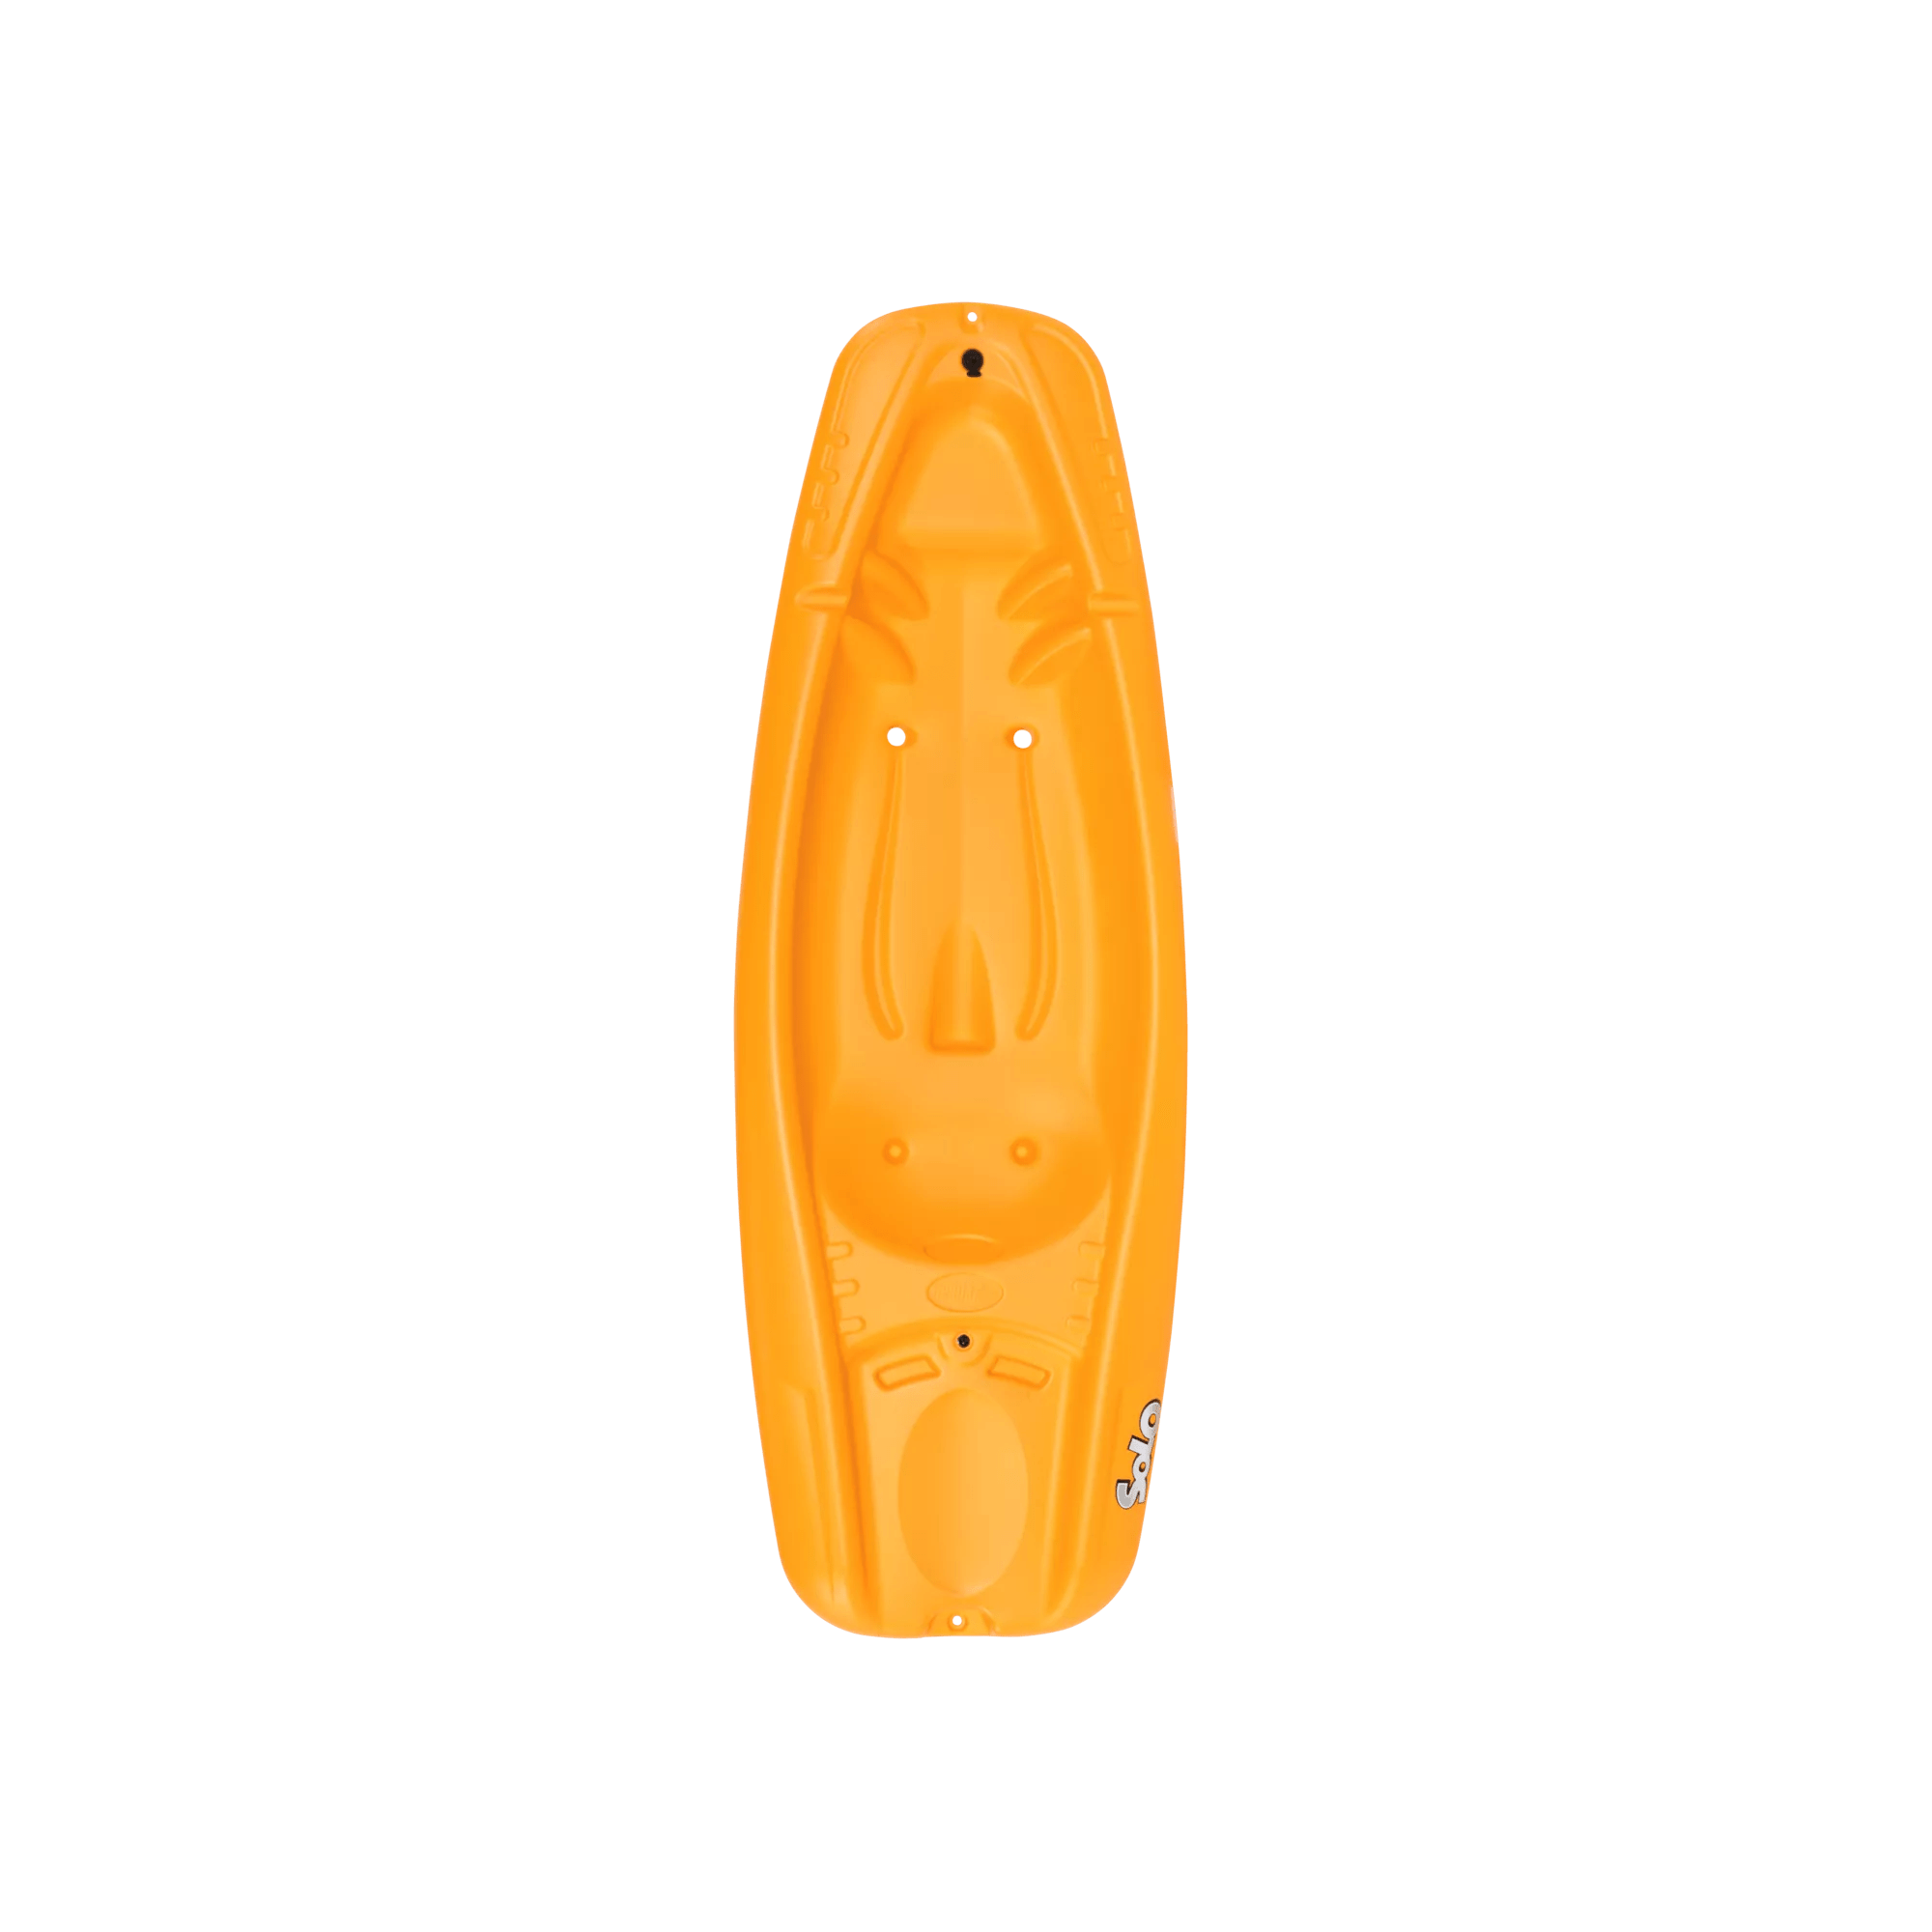 PELICAN - Solo Kids Kayak with Paddle - Discontinued color/model - Orange - KOS06P102-00 - TOP